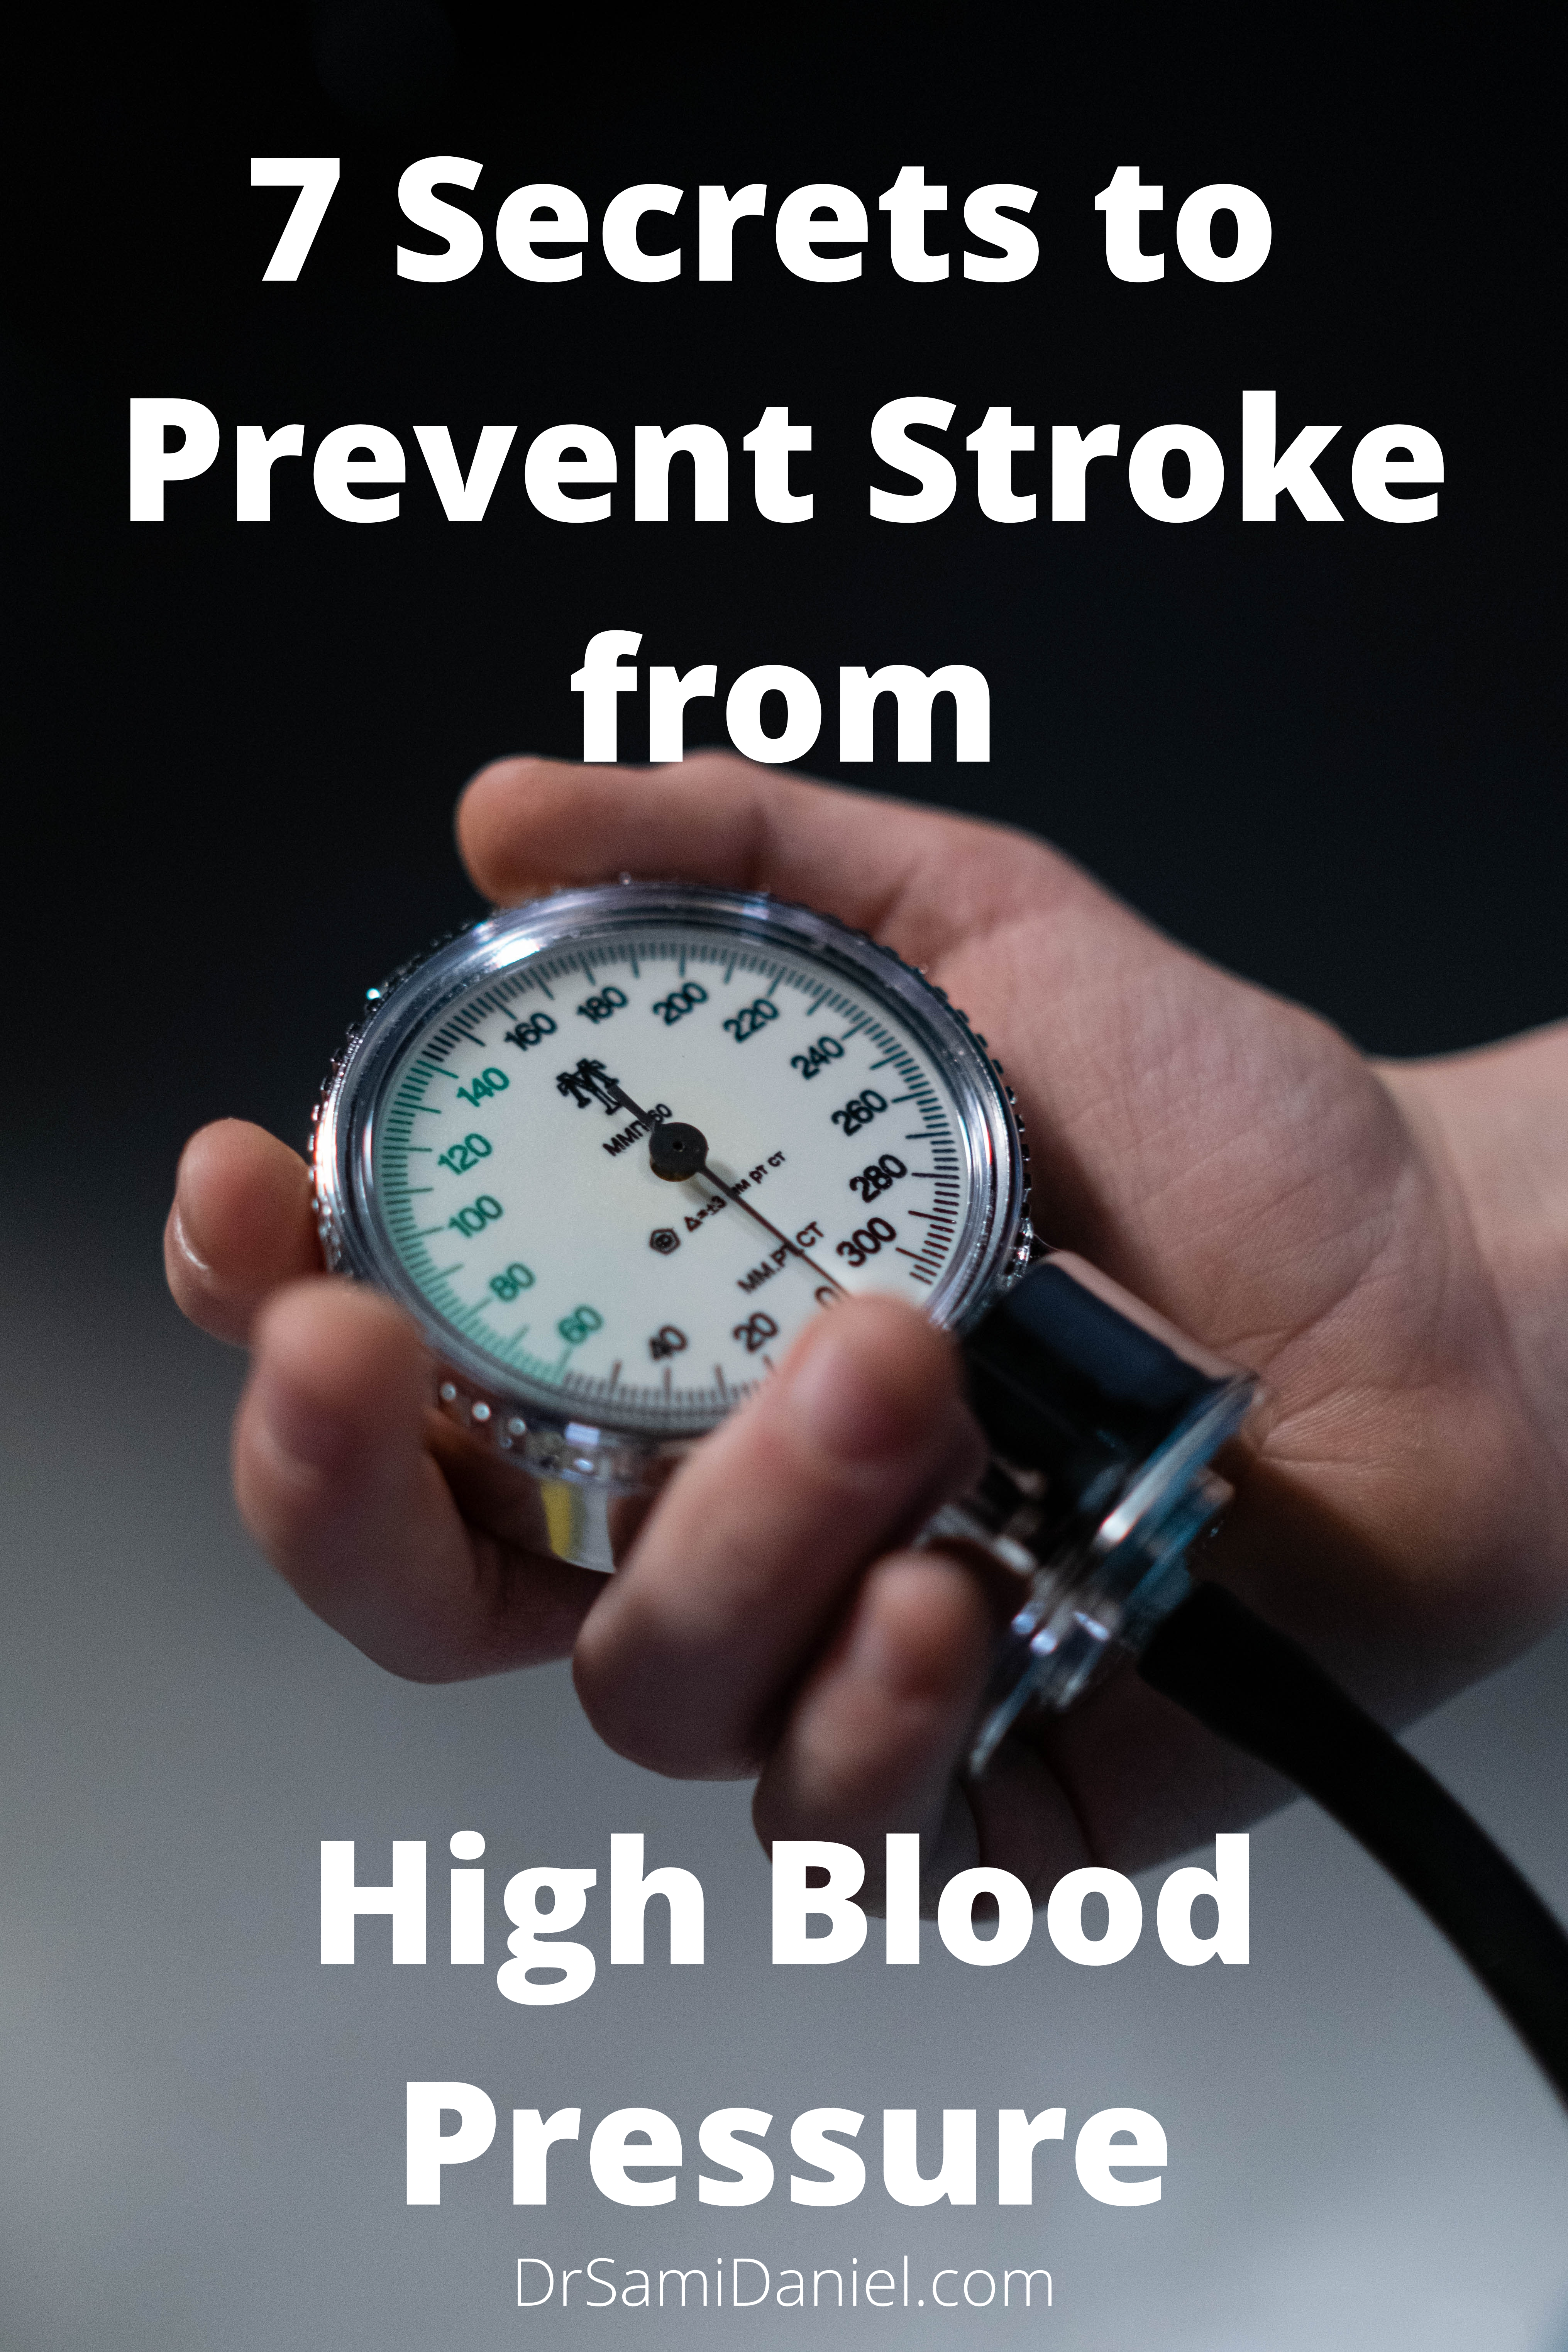 7 Secrets to Prevent Stroke from High Blood Pressure